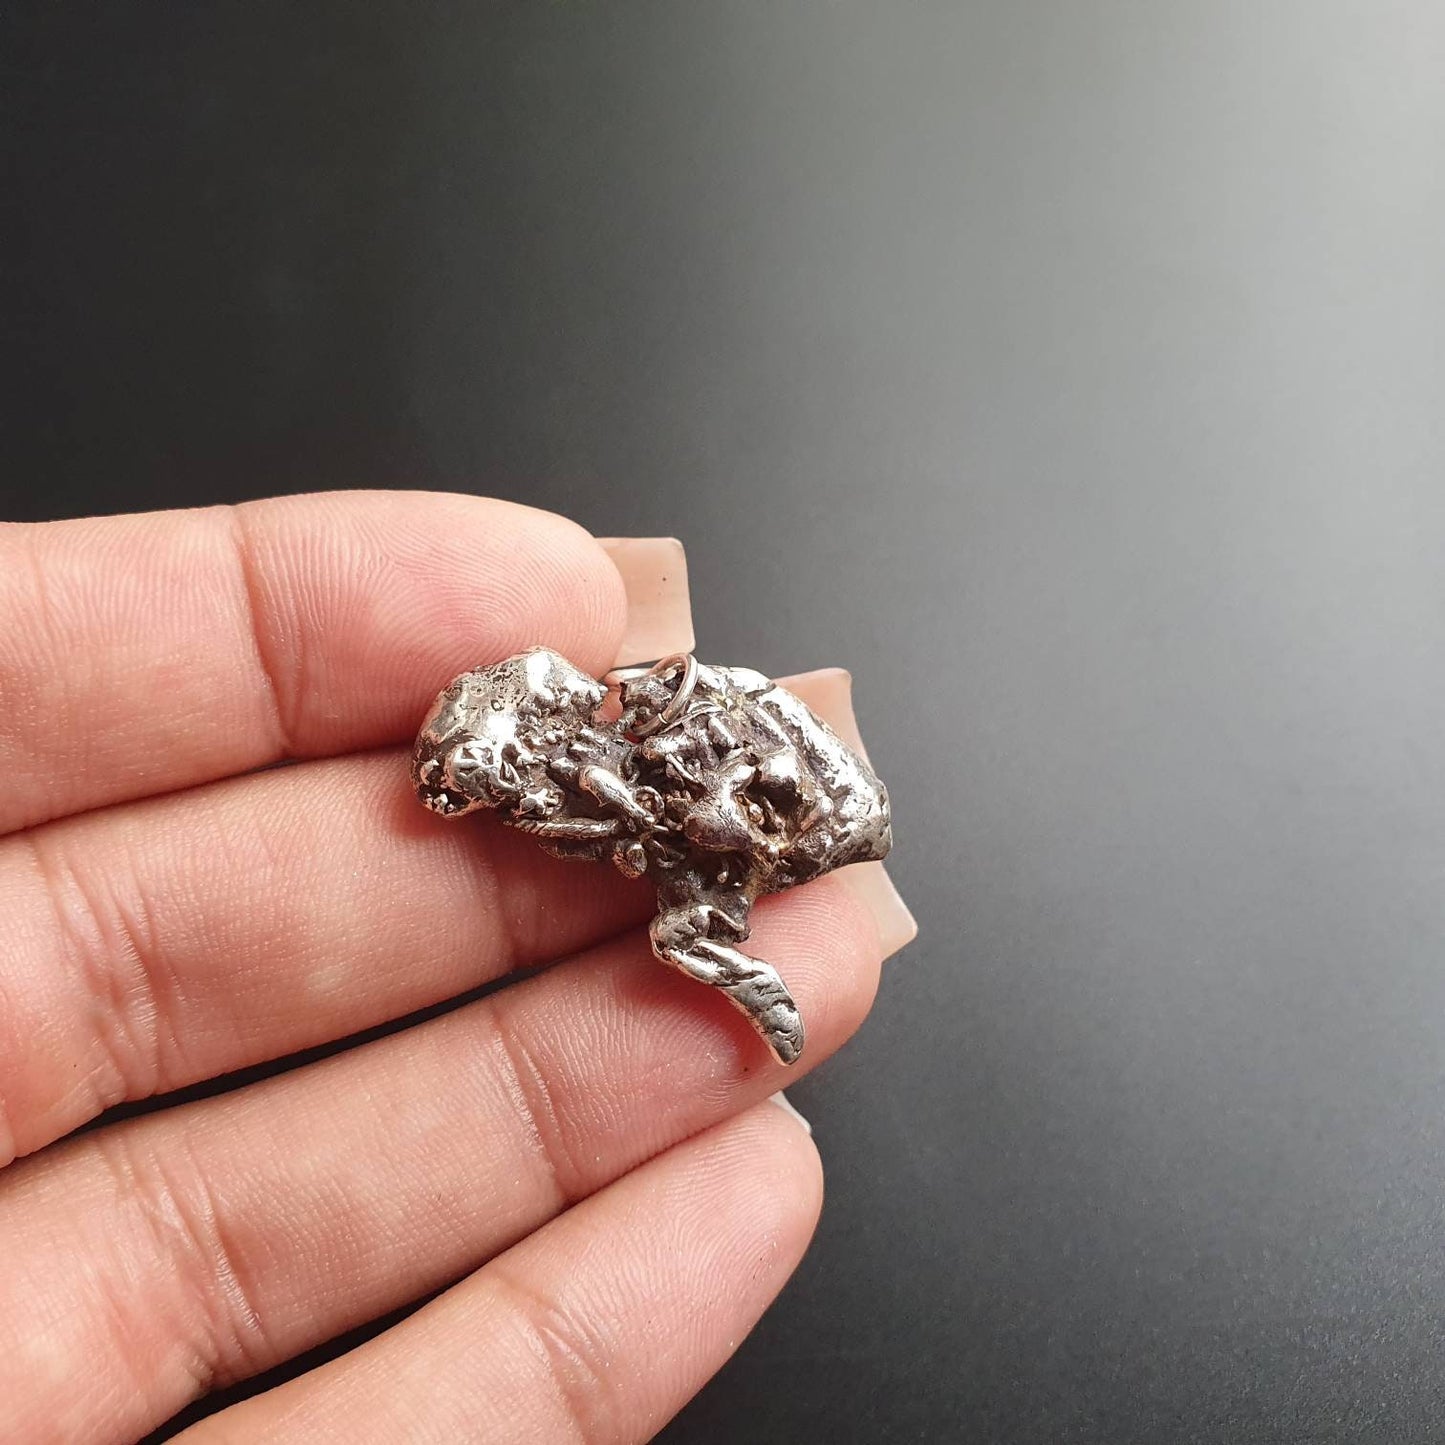 Brutalist,Molten silver pendant, sterling silver, pendant, mangled,art, twisted, abstract, design, vintage, unique style, sterling silver jewelry